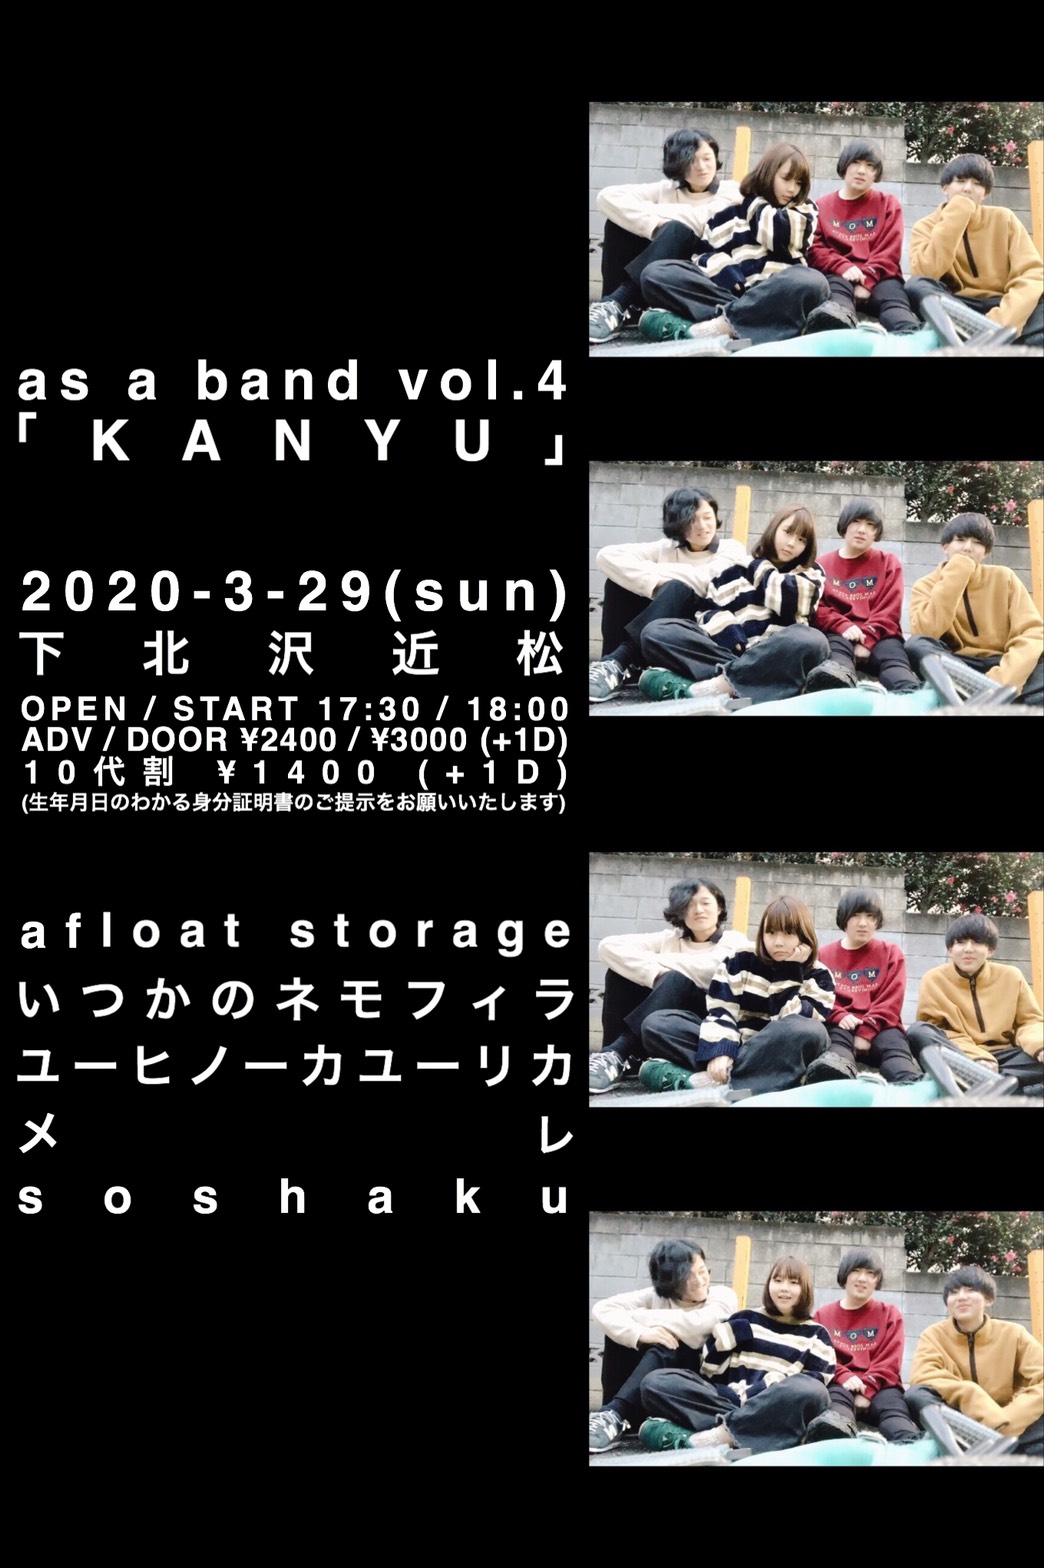 afloat storage pre. as a band vol.4「KANYU」